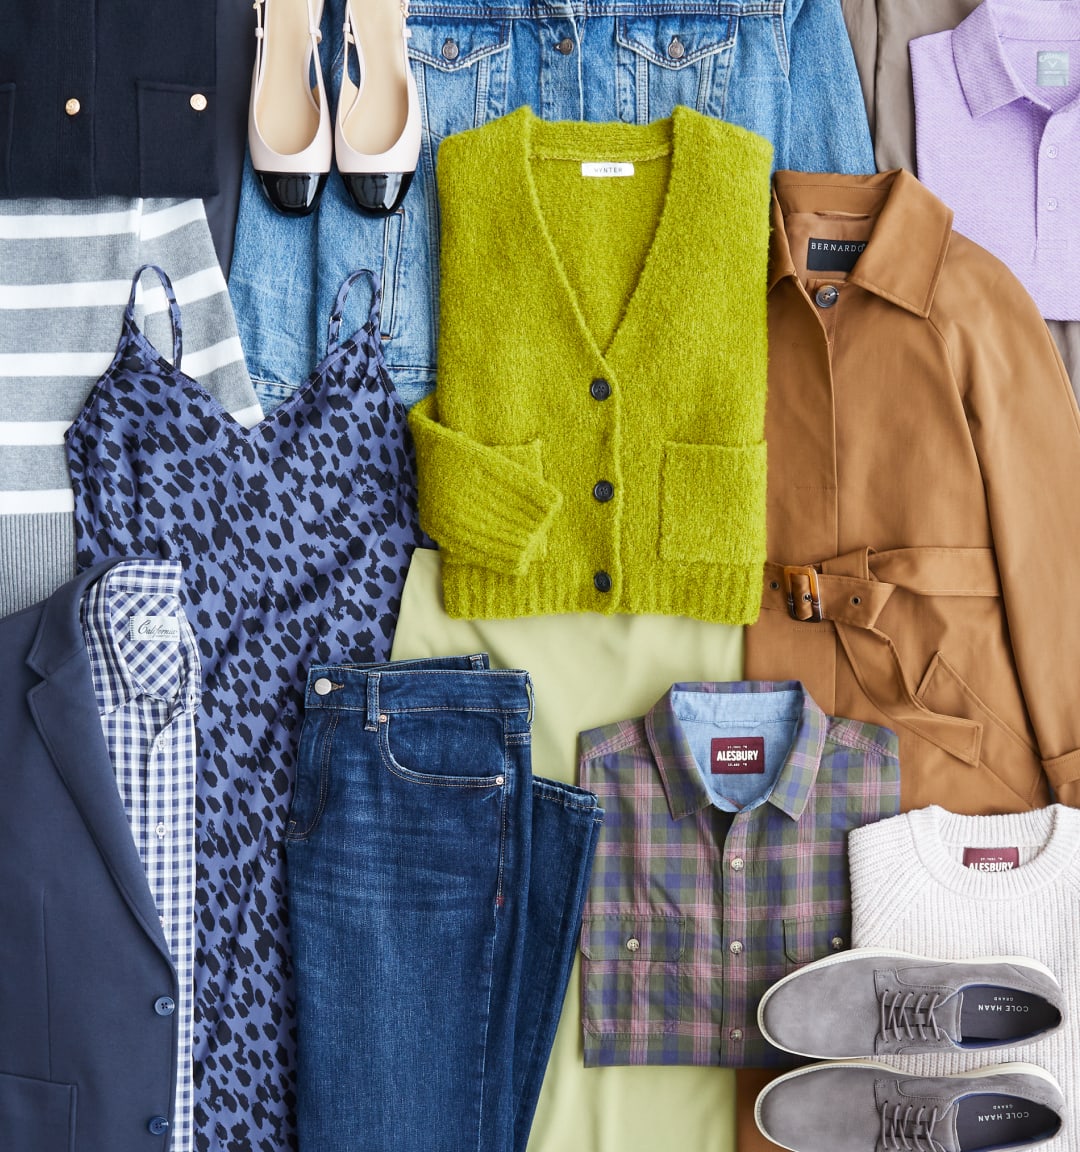 Stitch Fix clothing from various brands including trending styles including women’s and men’s denim, knit sweaters and button-down shirts.